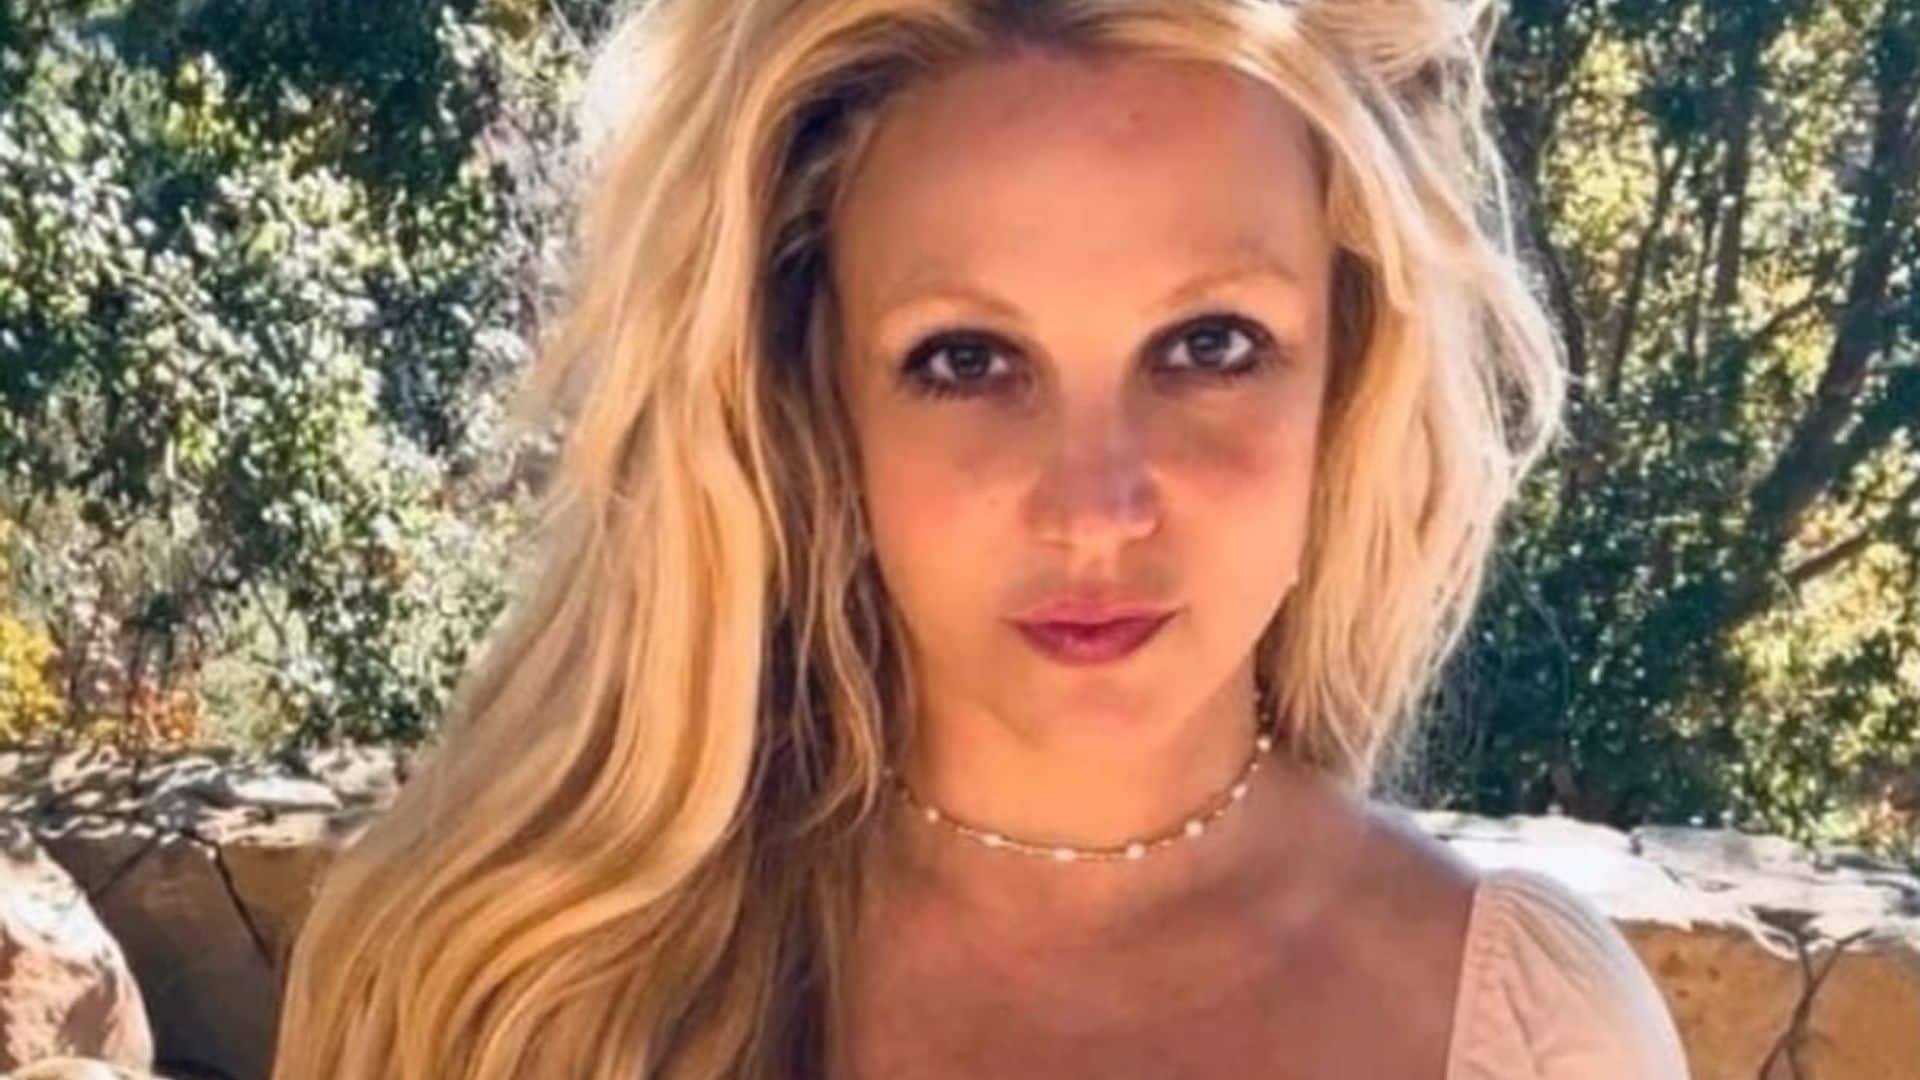 Britney Spears hits back at haters and shares new workout routine